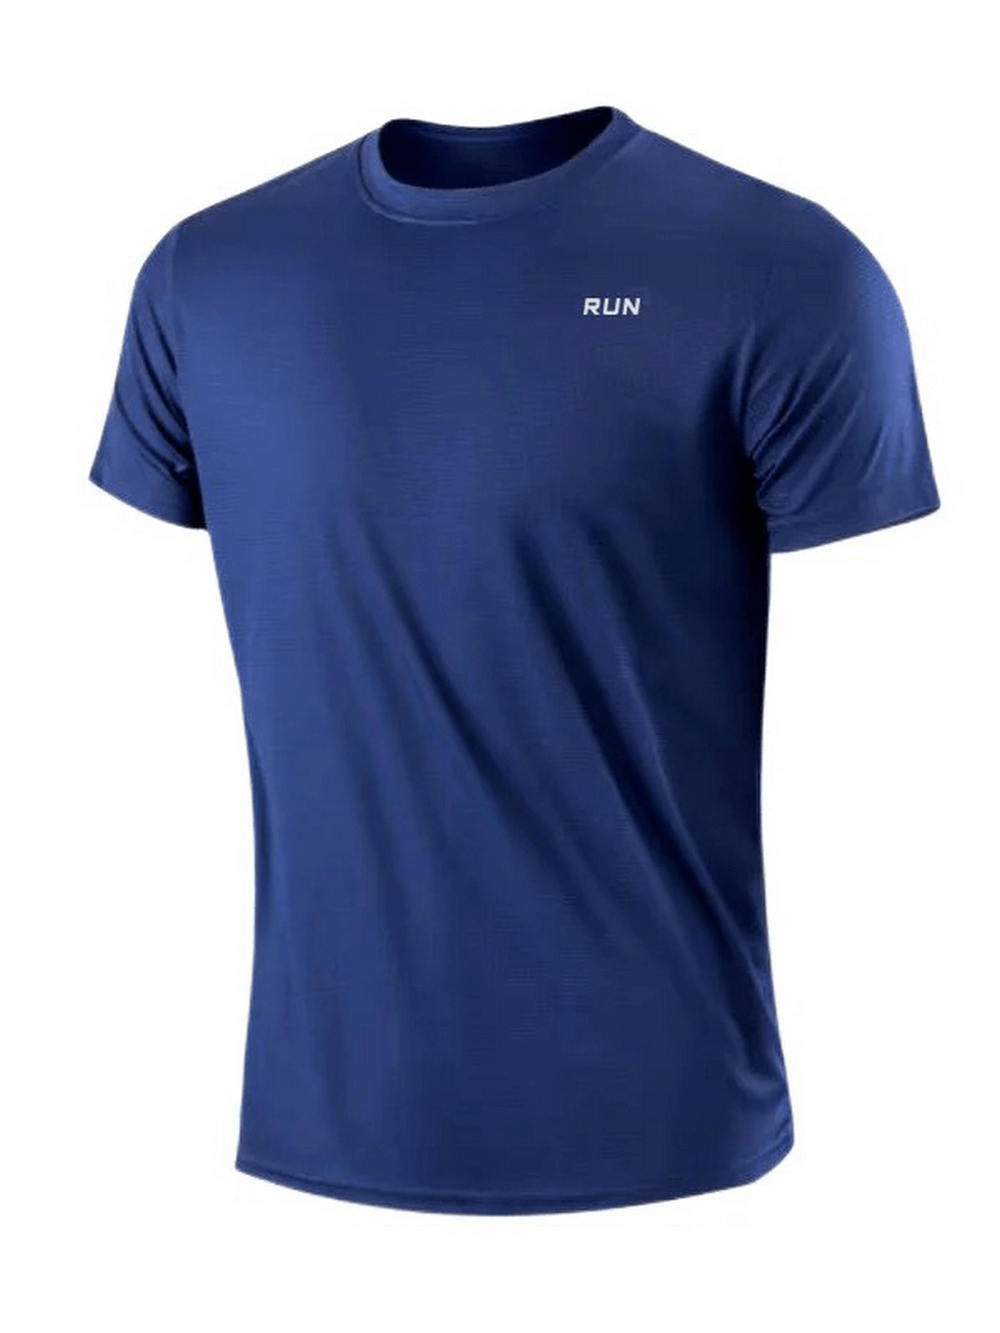 Men's Quick-Drying Round Neck T-Shirt for Training - SF2156